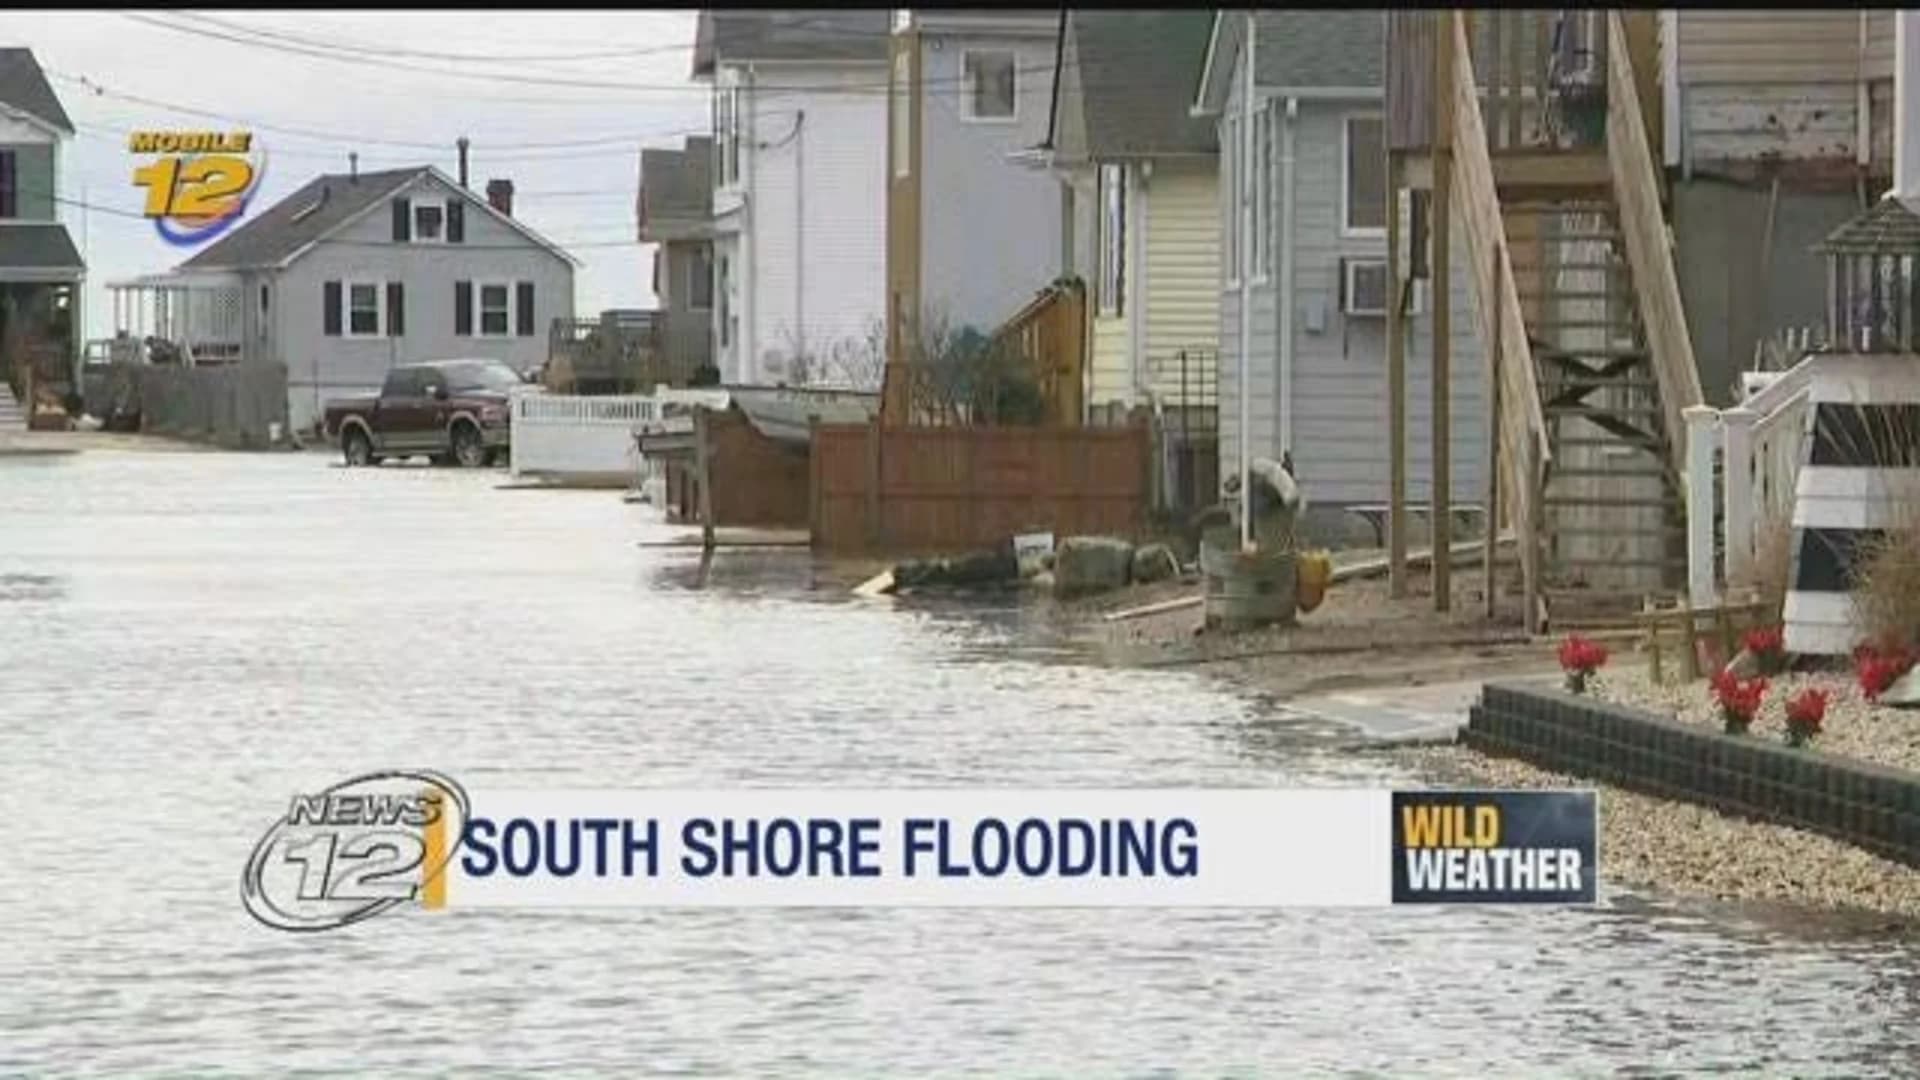 New nor'easter brings fresh flooding fears for waterlogged LIers